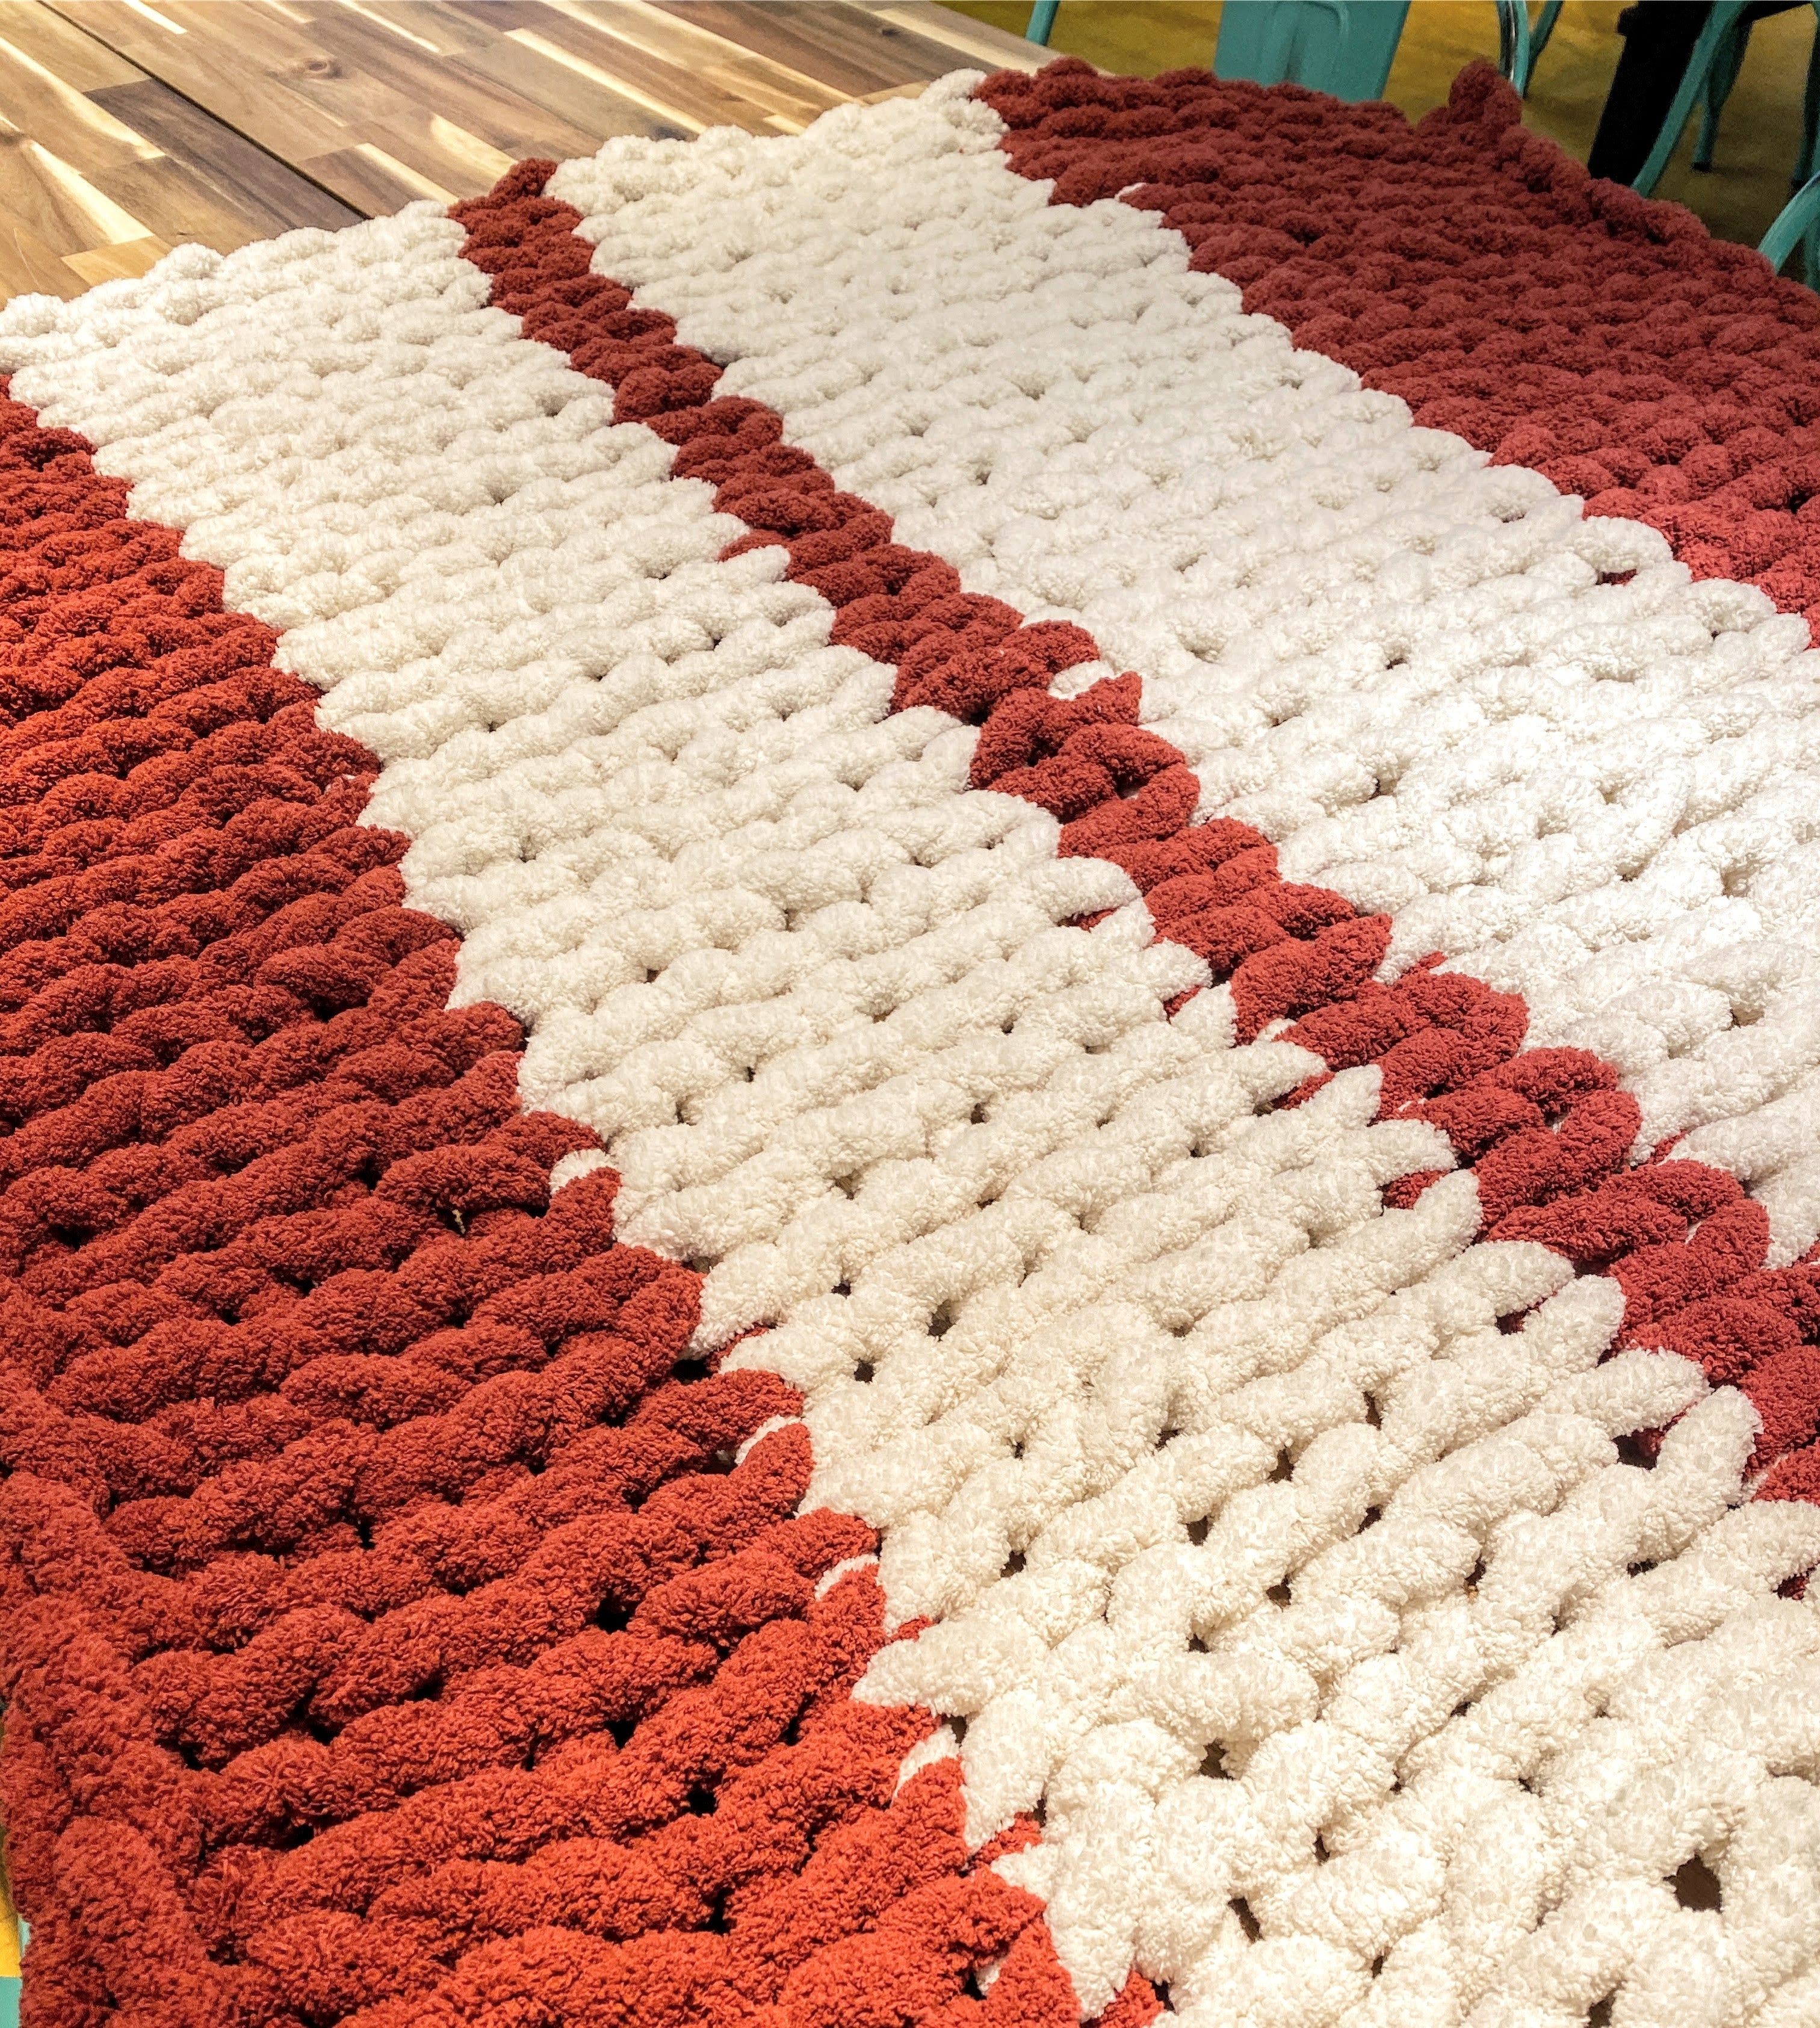 How To Make Your Own Chunky Knit Blanket To Cozy Up Your Day